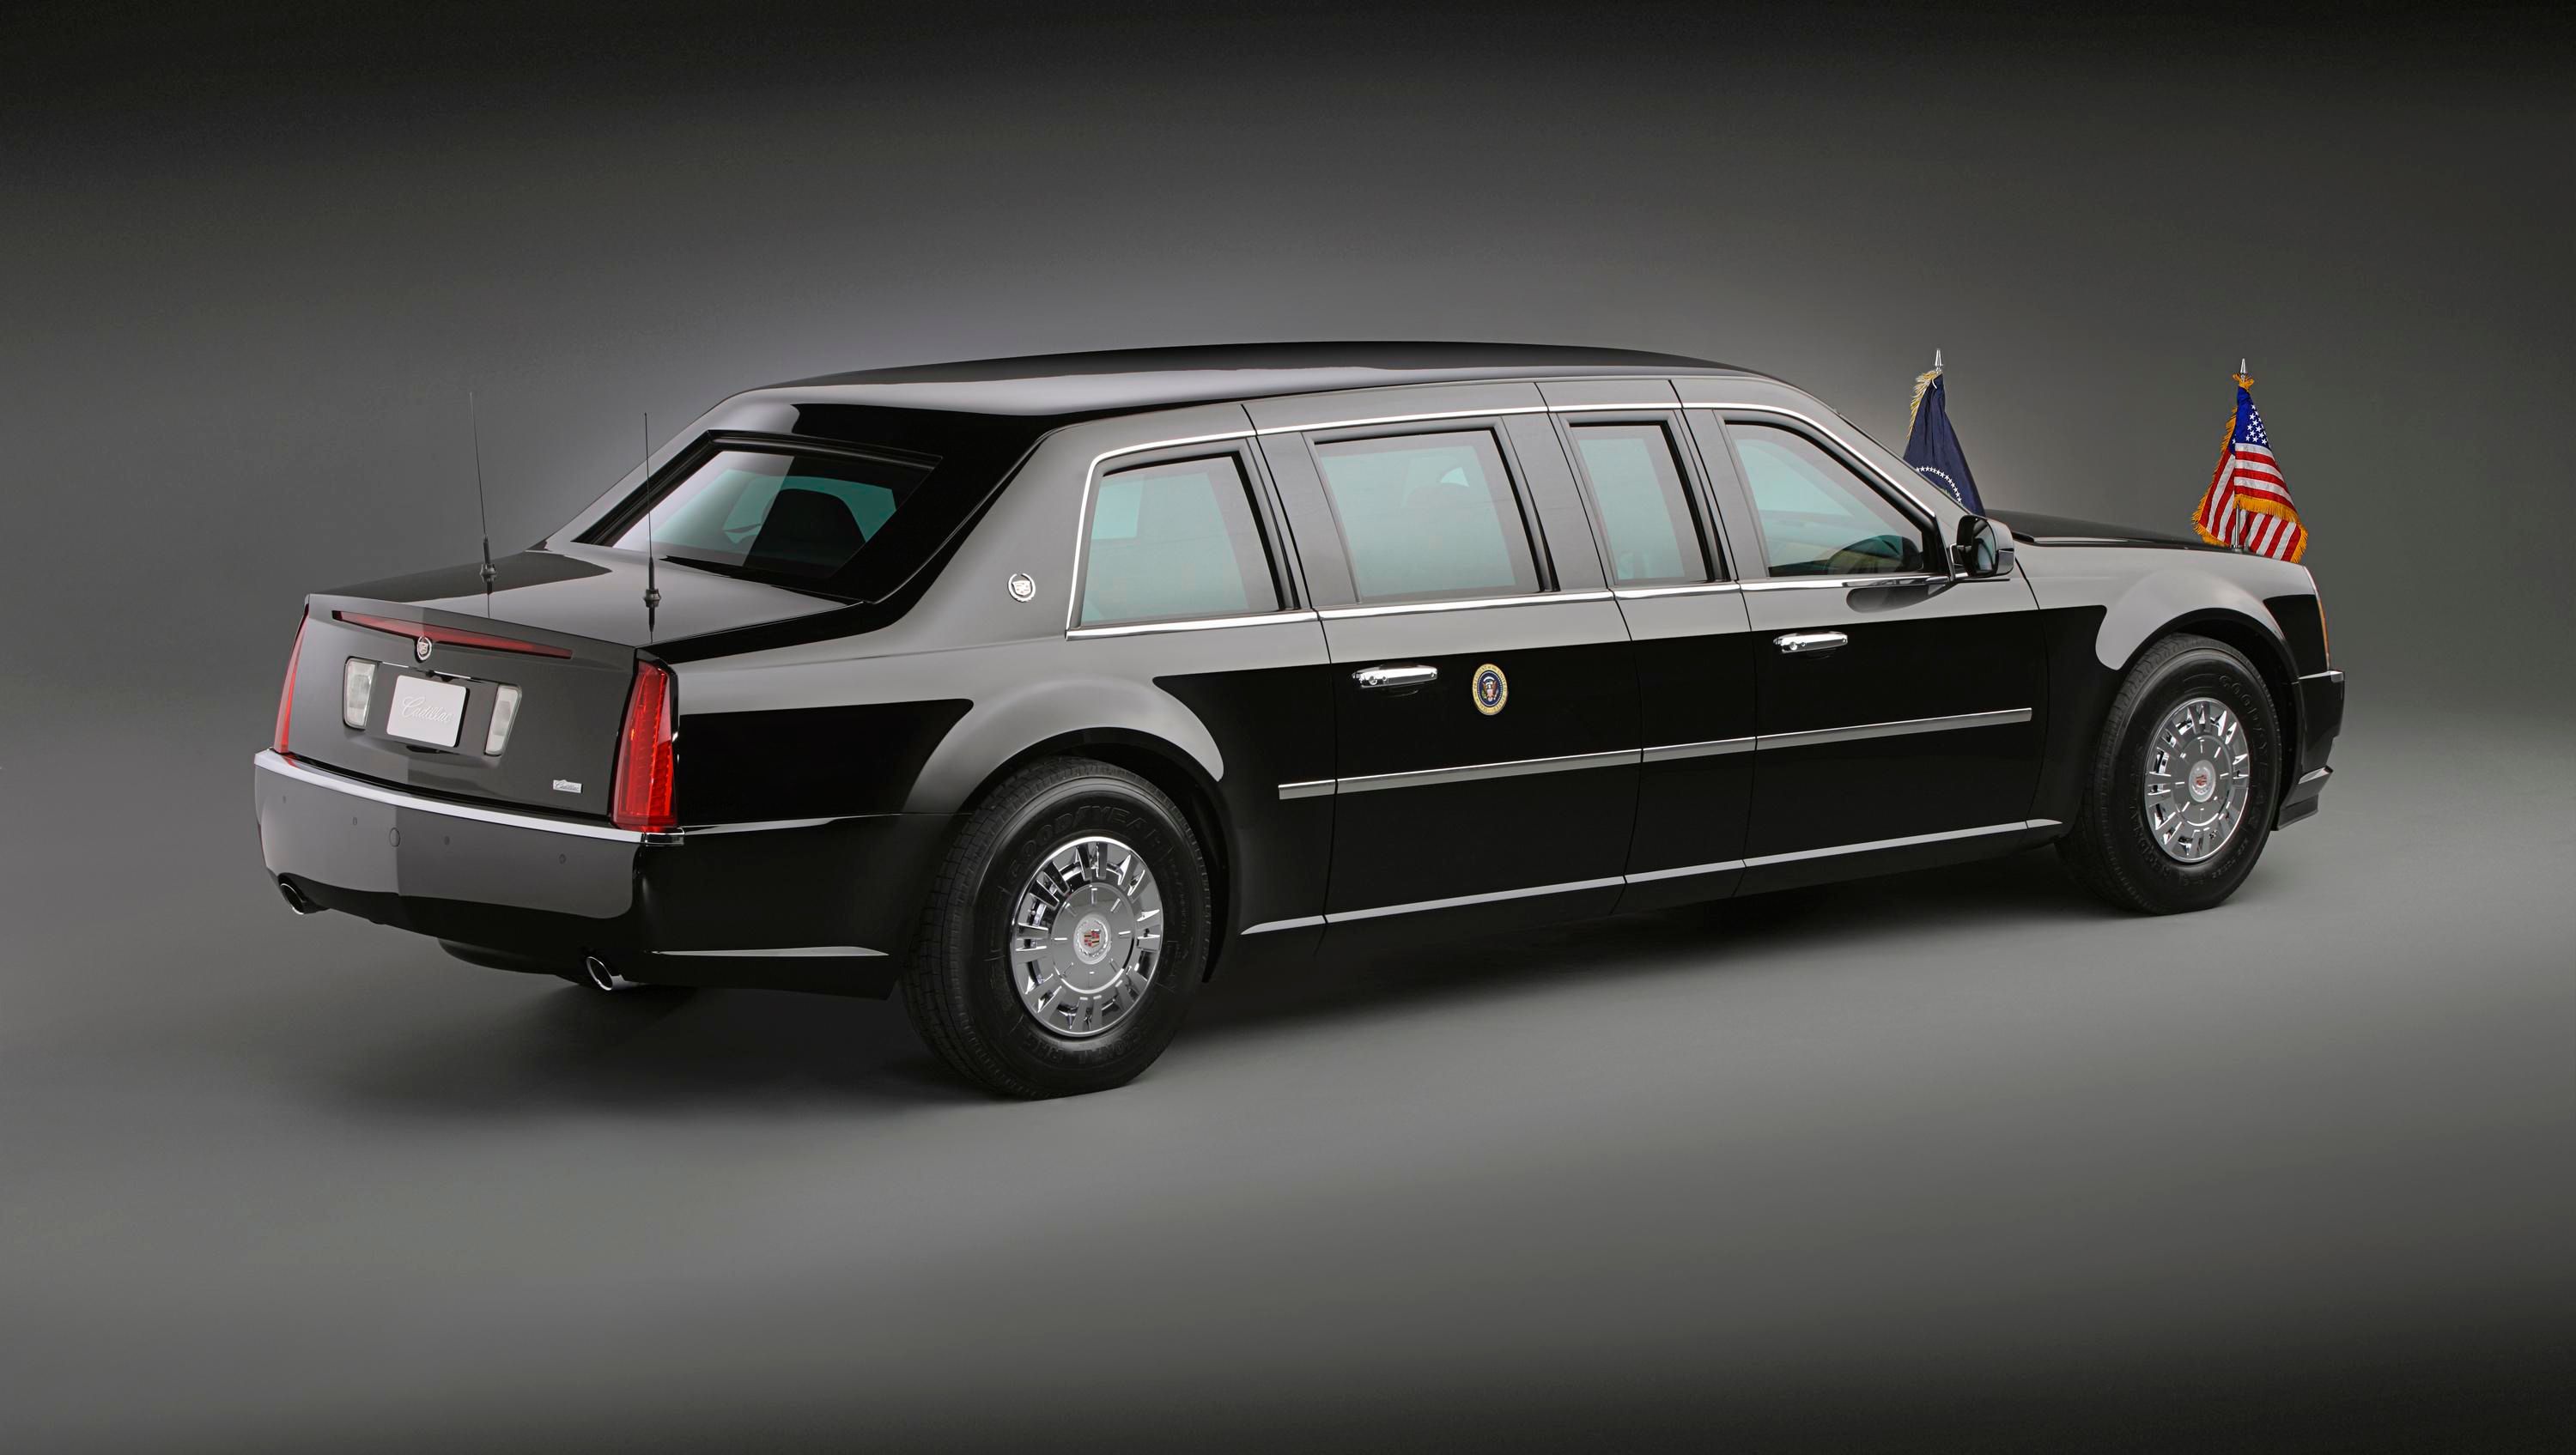 President Donald Trump's New Presidential Cadillac Limo 